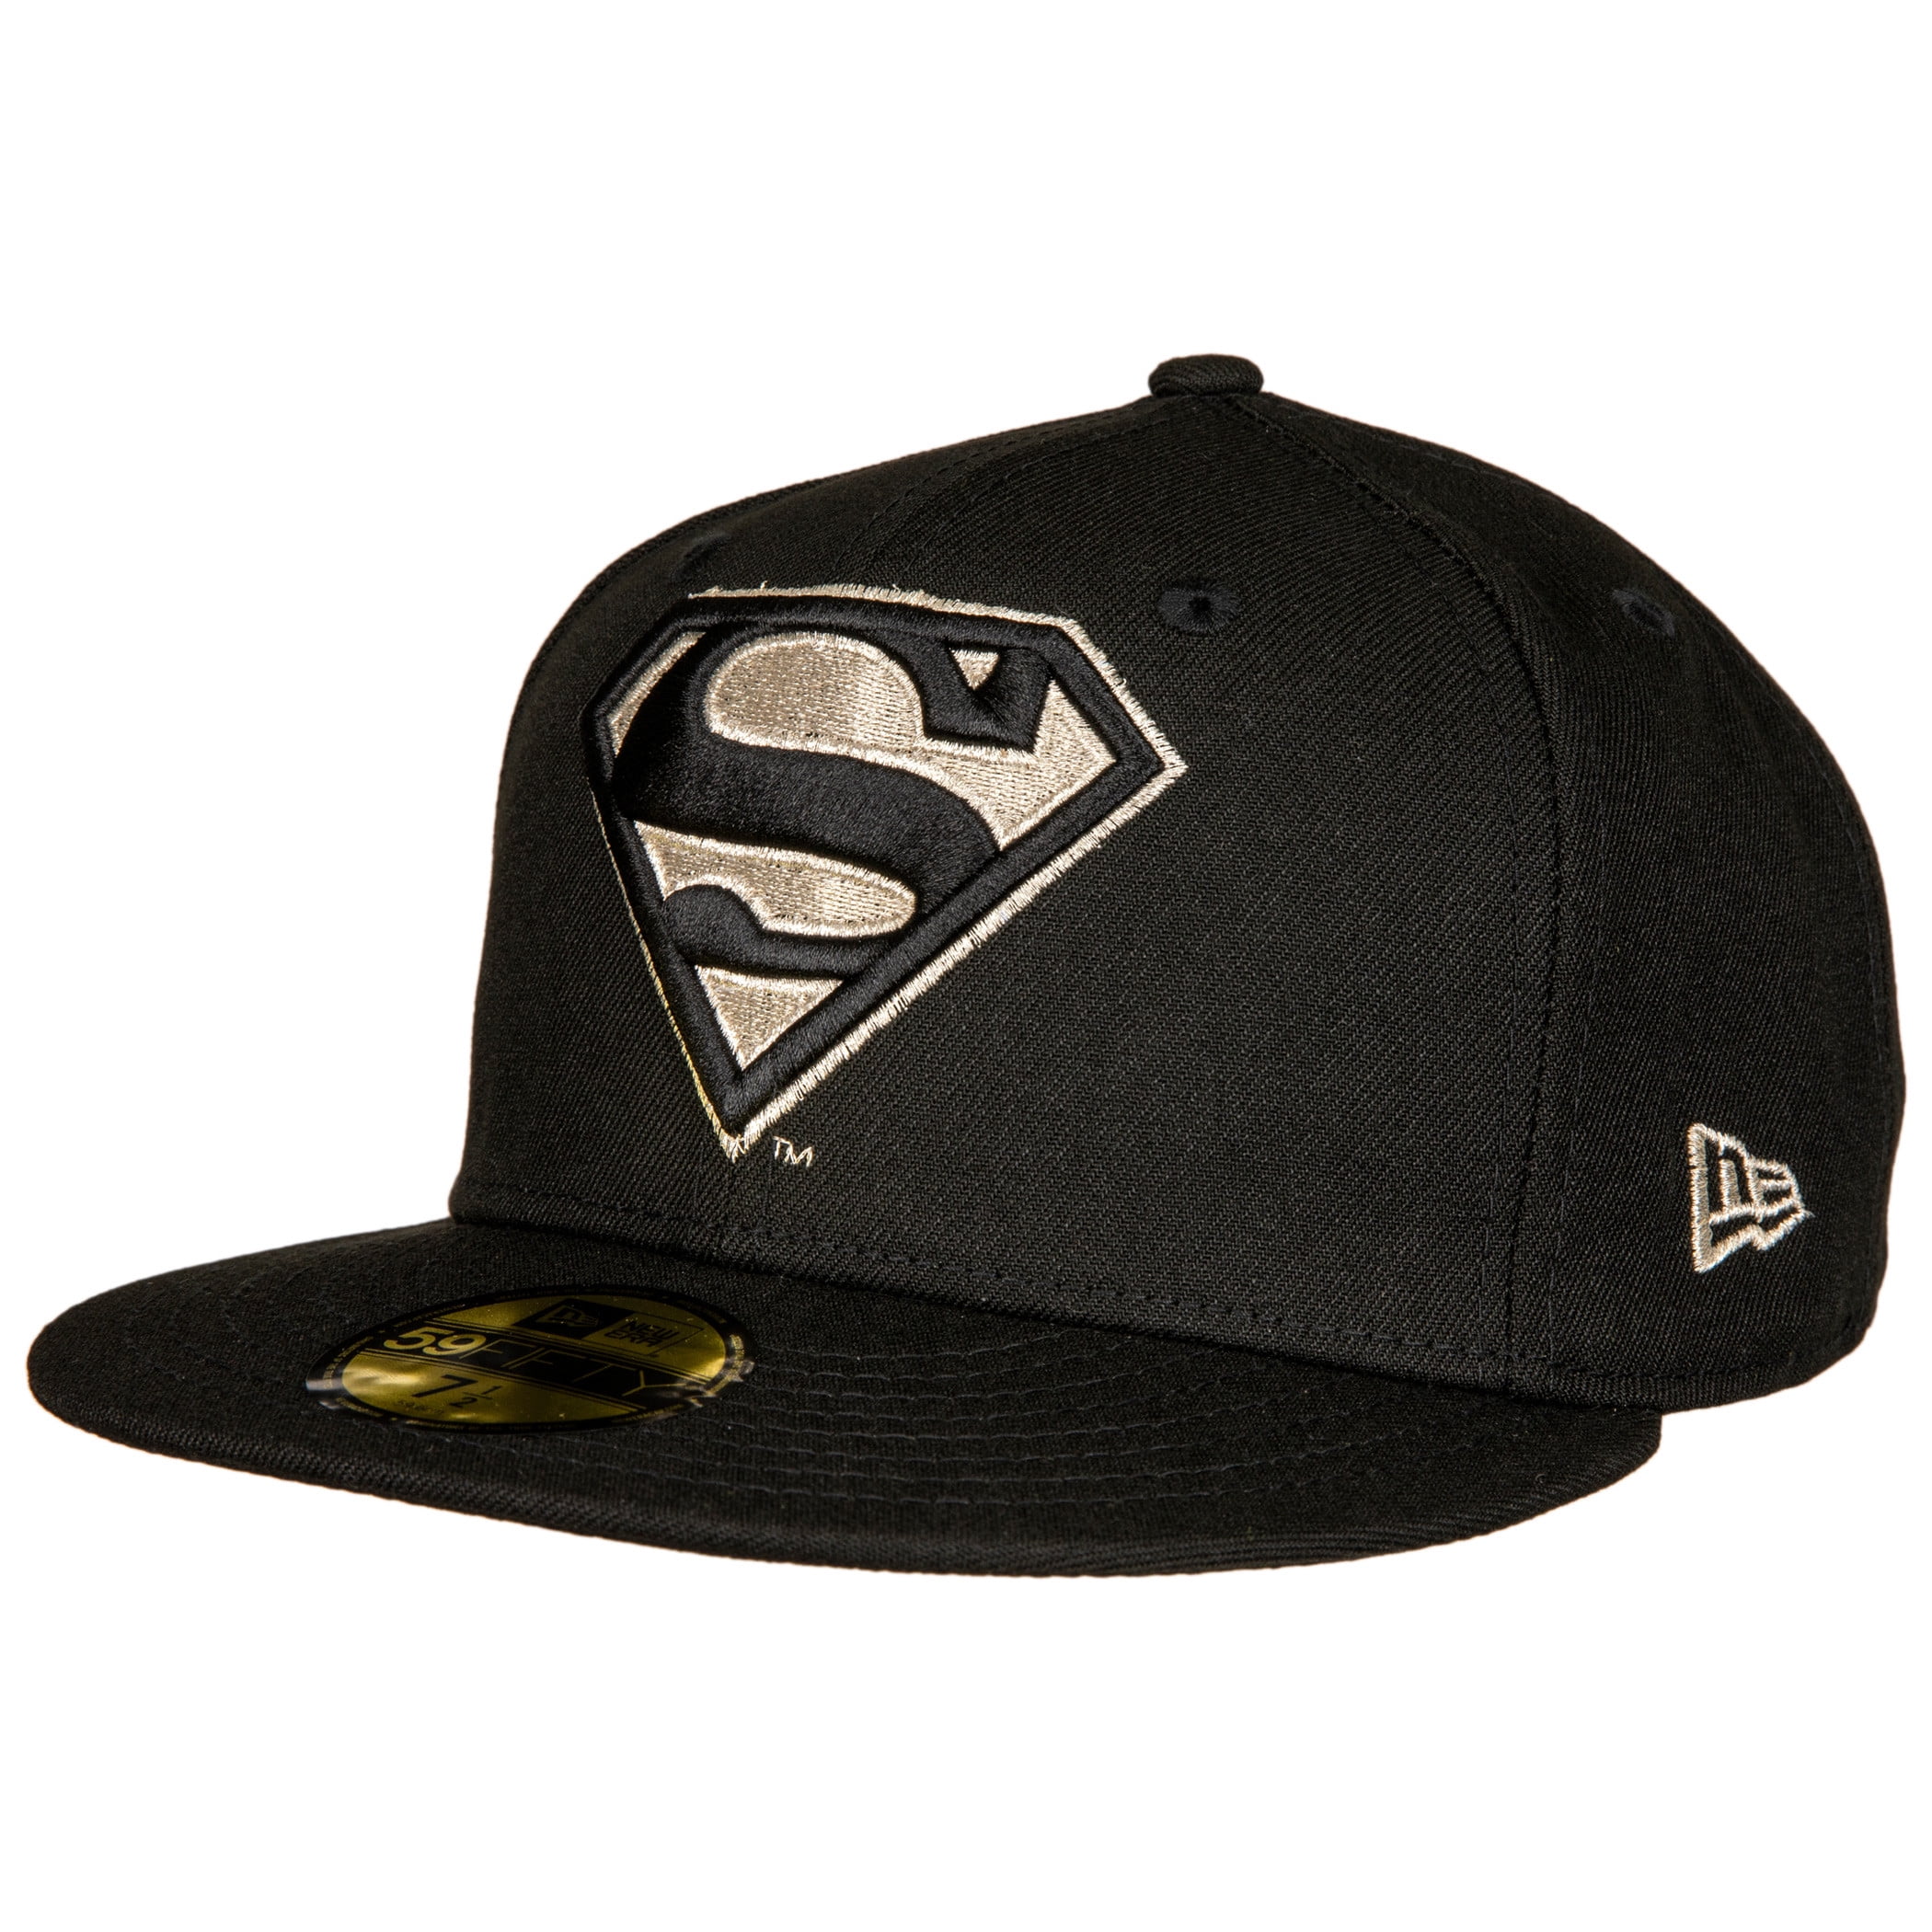 NEW ERA OFFICIAL DC 59FIFTY FITTED BASEBALL CAP SUPERMAN GOLD 3D LOGO MANY SIZES 